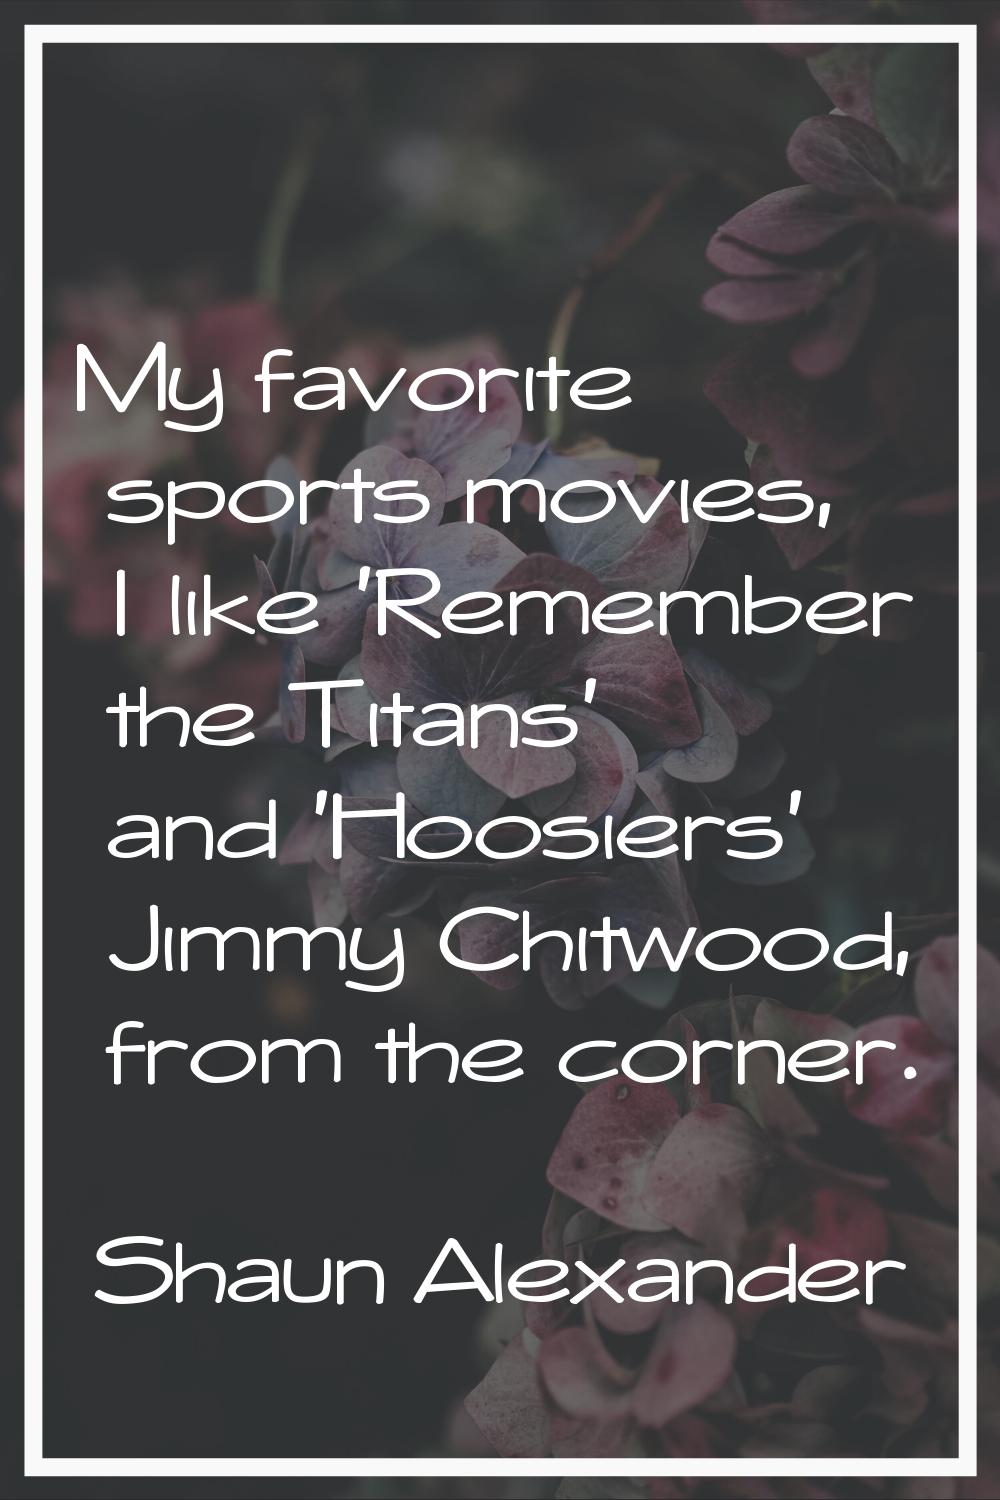 My favorite sports movies, I like 'Remember the Titans' and 'Hoosiers' Jimmy Chitwood, from the cor